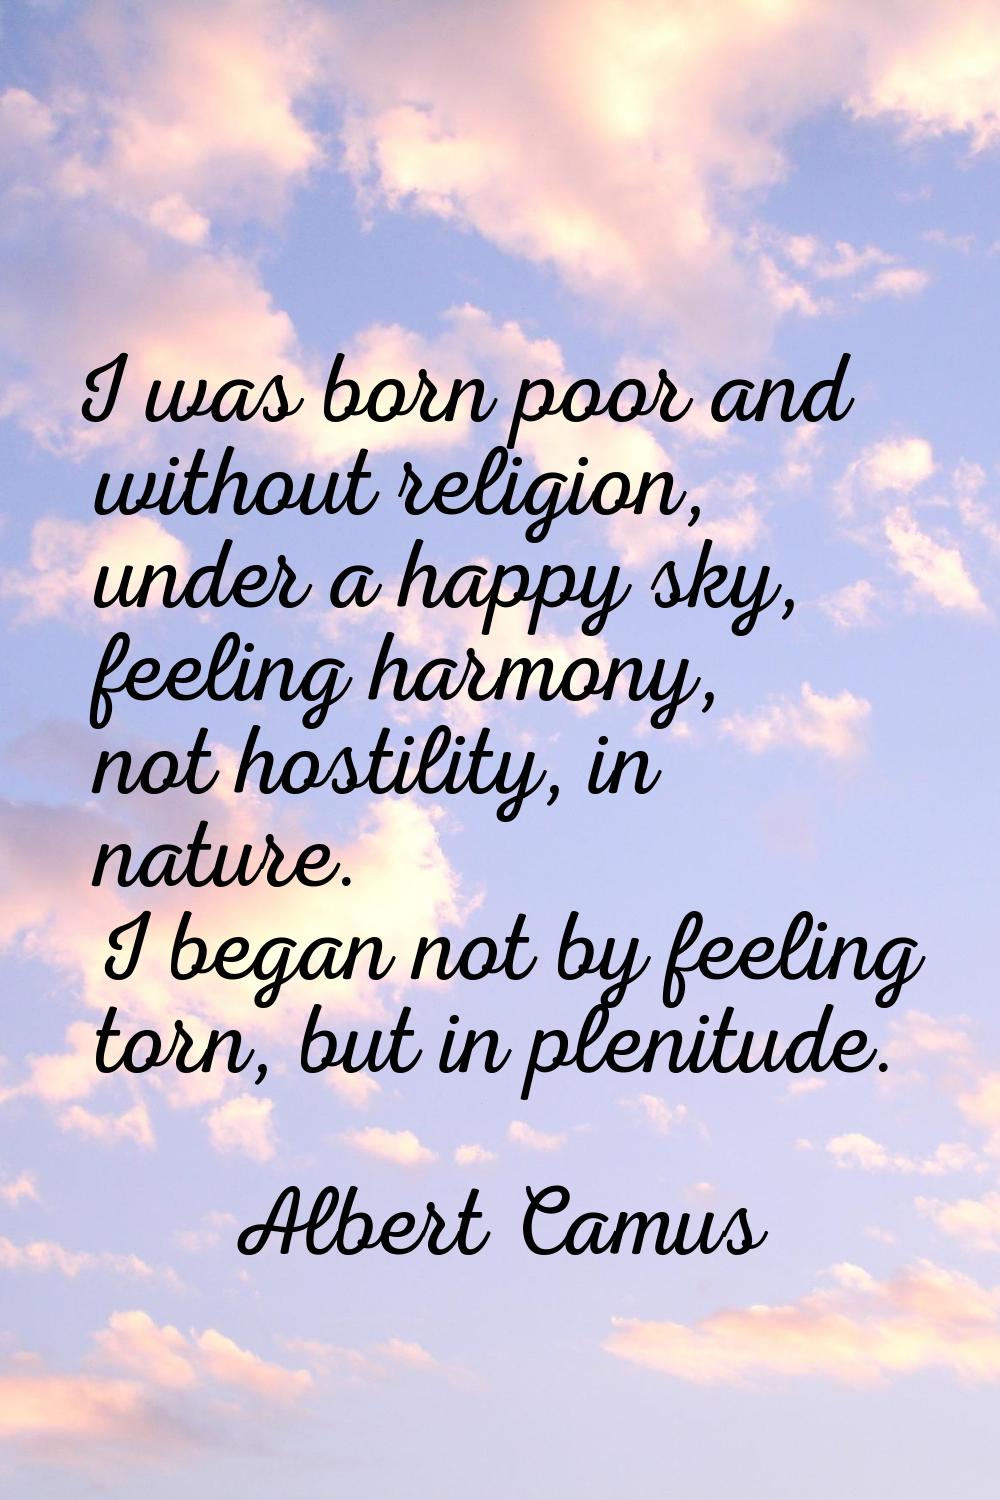 I was born poor and without religion, under a happy sky, feeling harmony, not hostility, in nature.